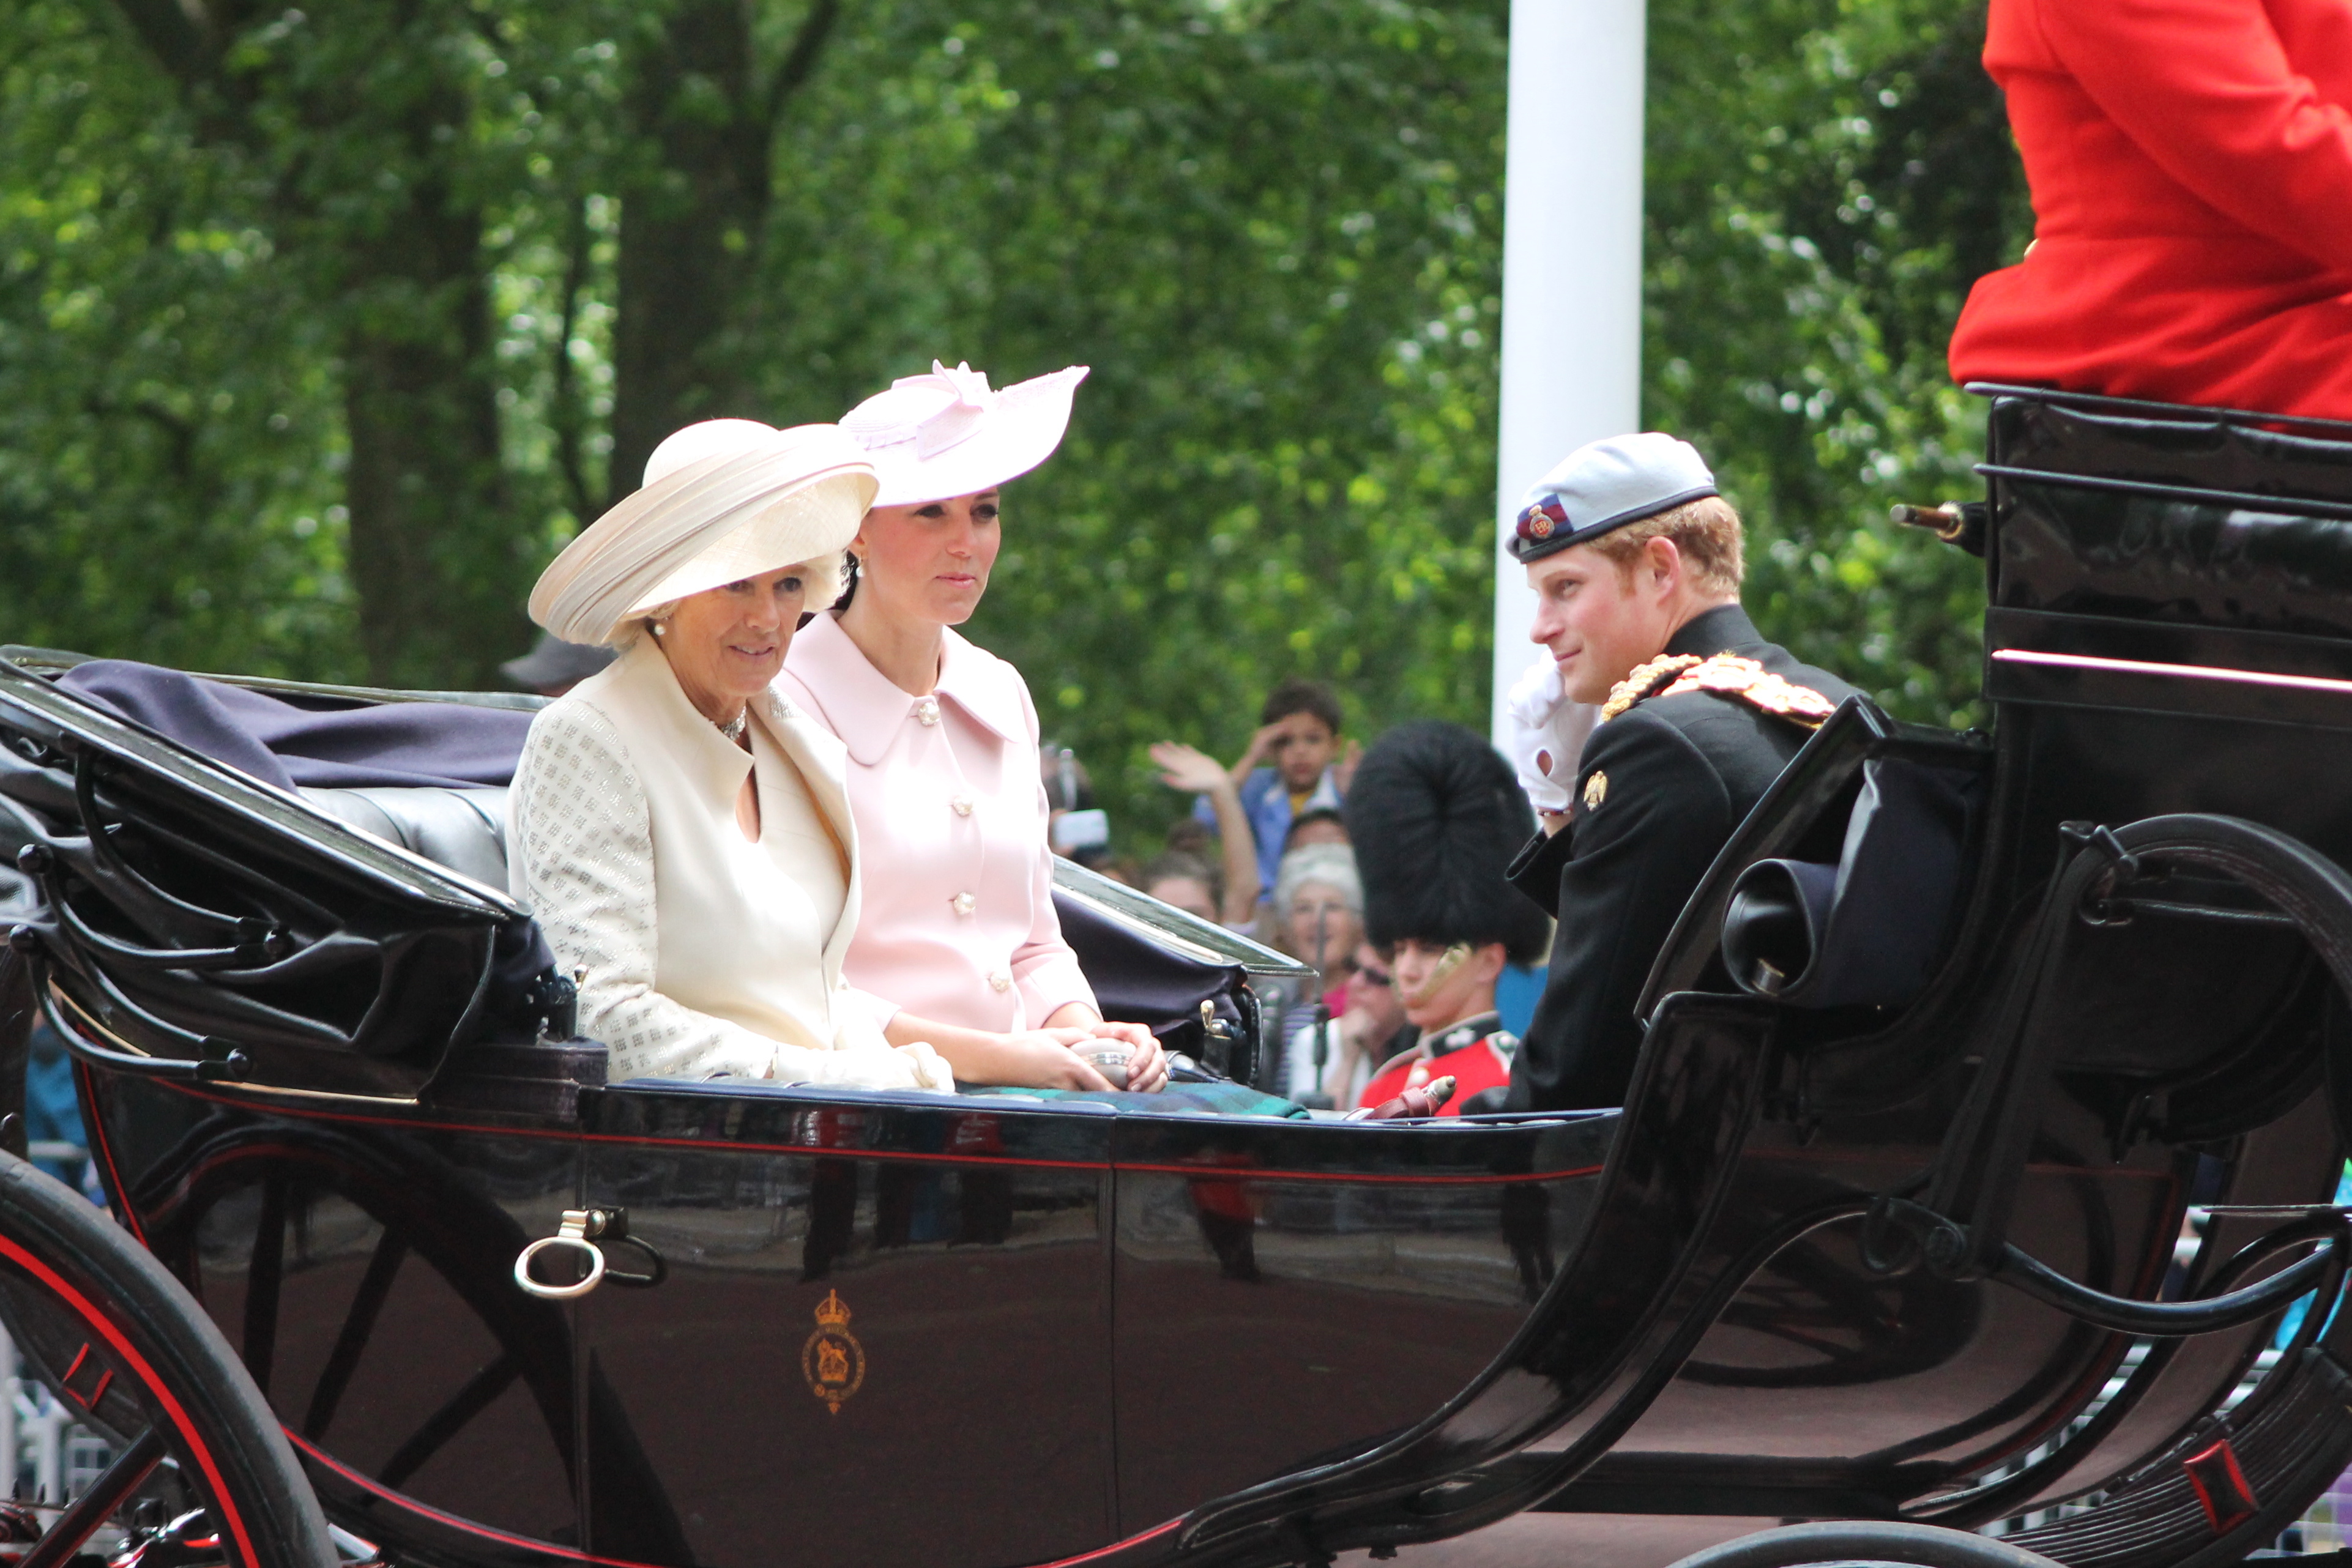 royal_carriage_trooping_the_colour.jpg